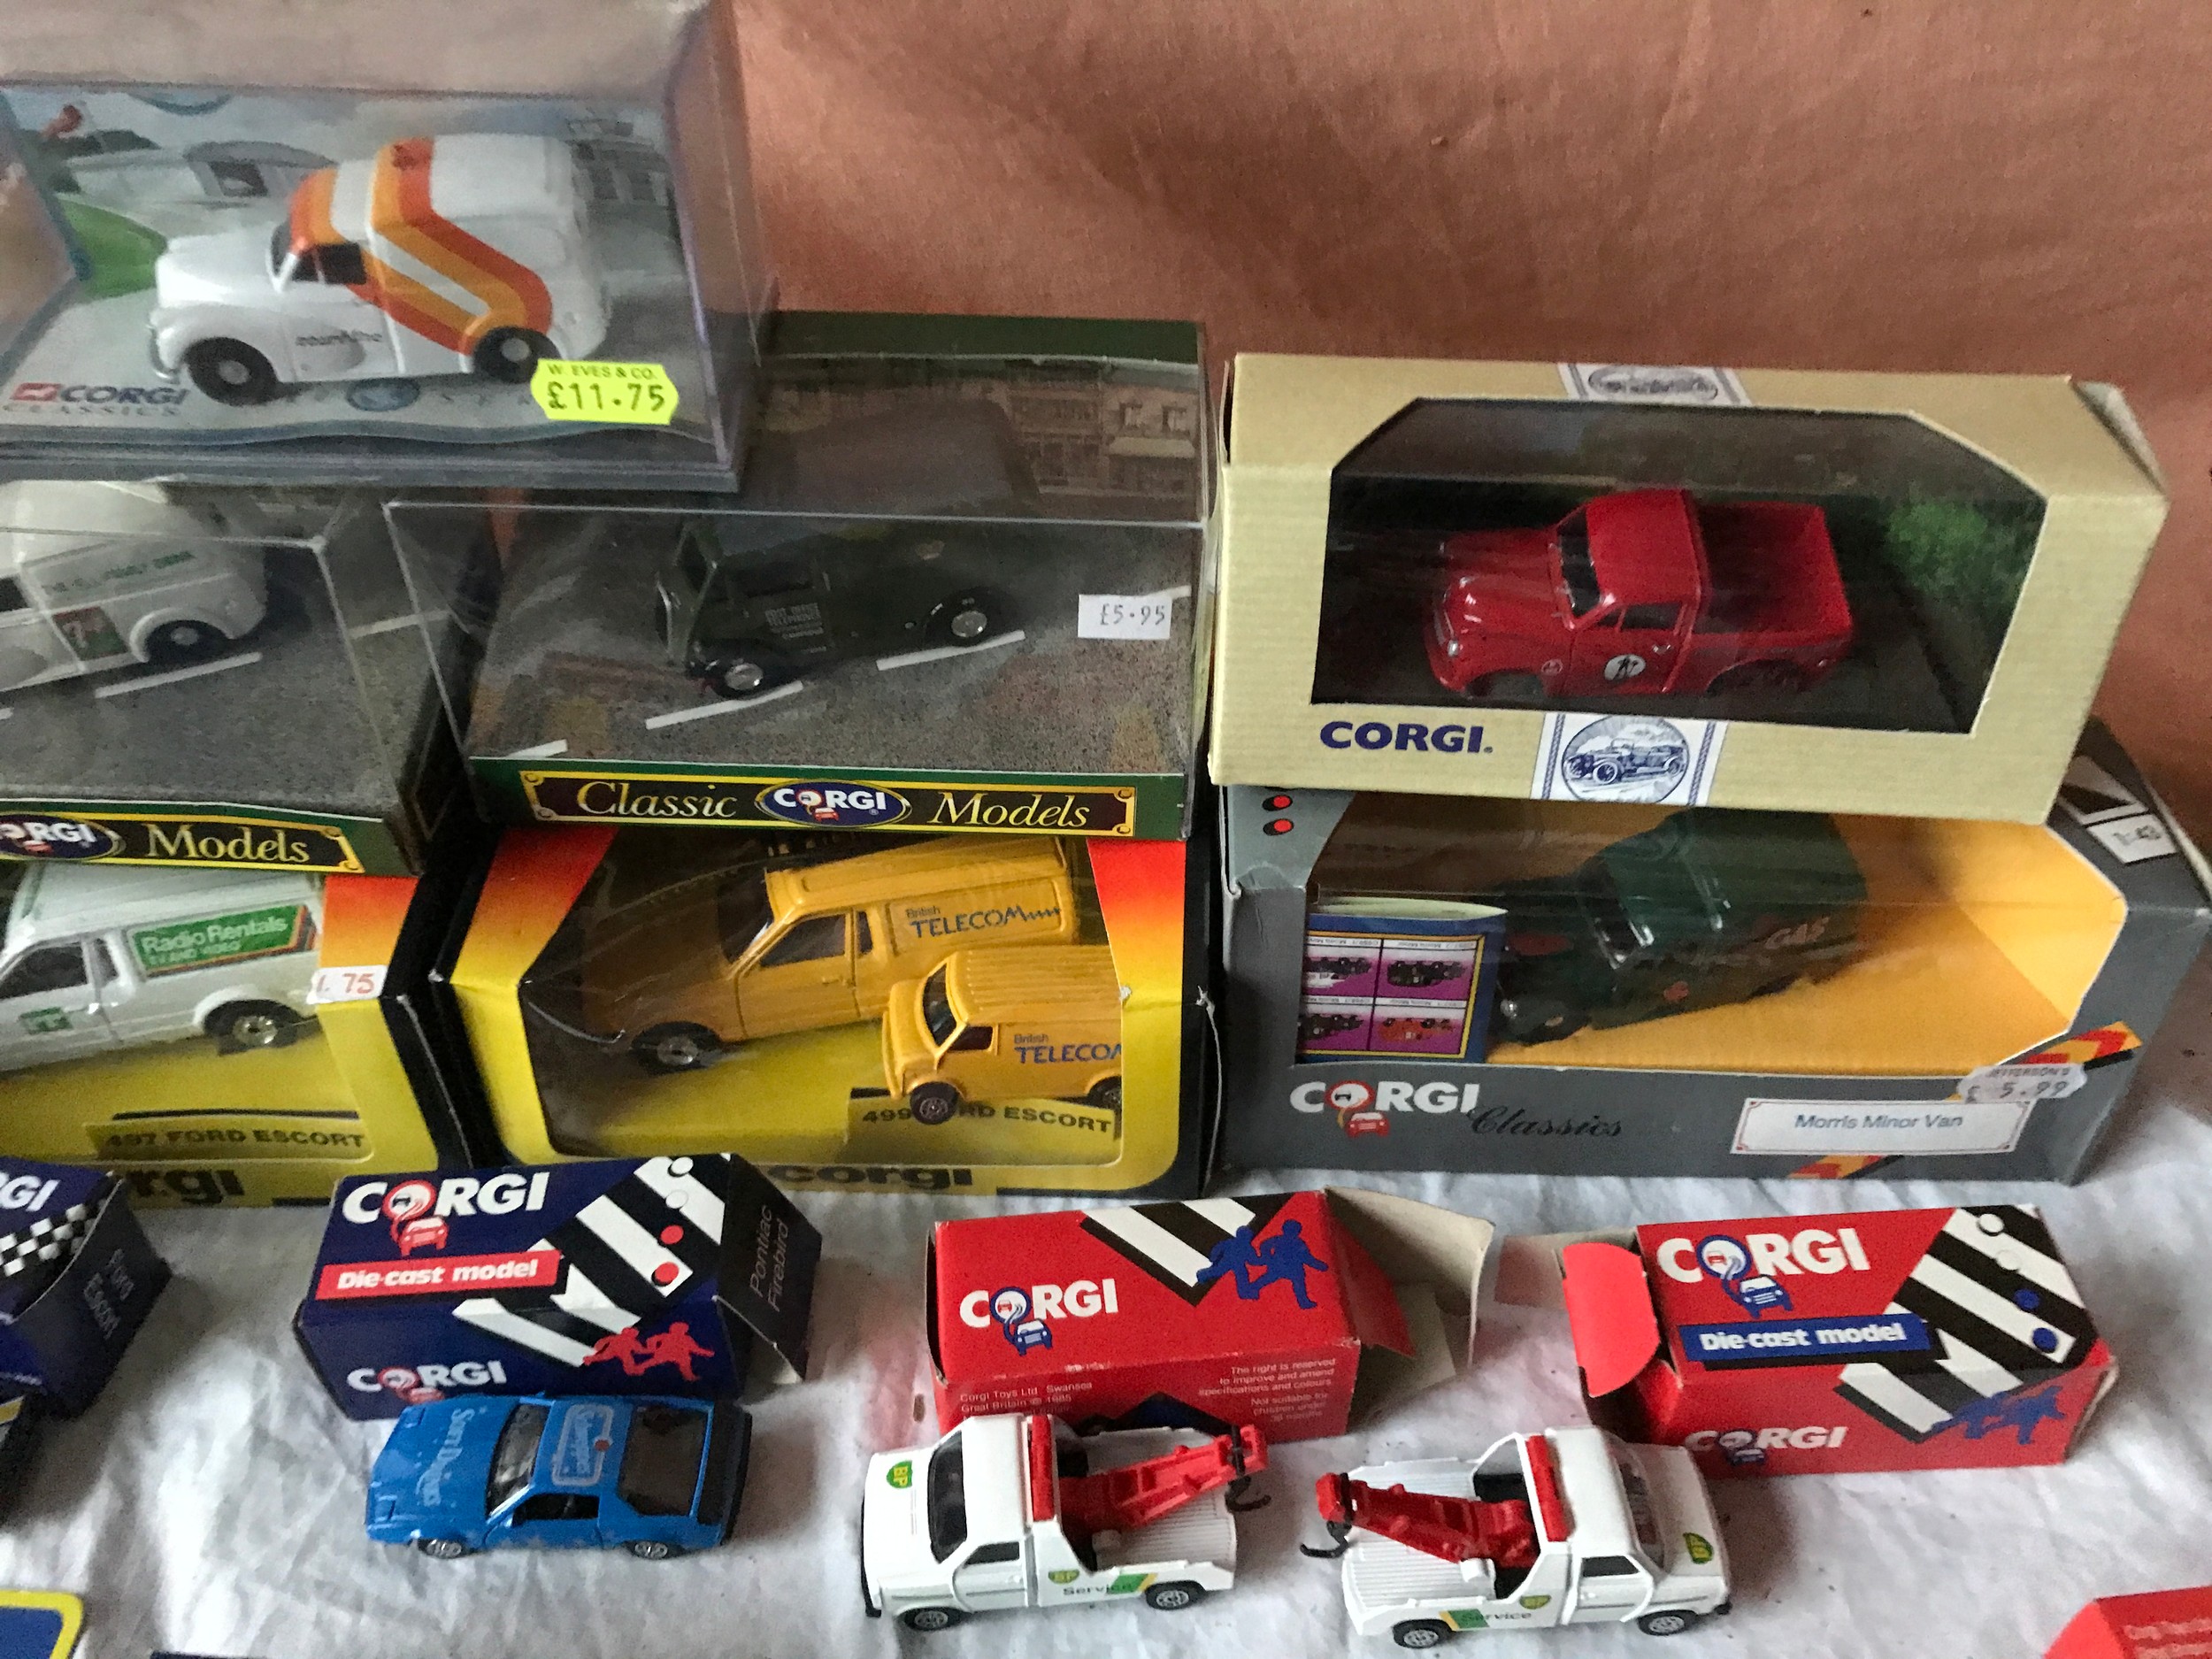 Corgi diecast model vans and cars collection of 38 assorted models, all boxed with no playwear, - Image 5 of 8